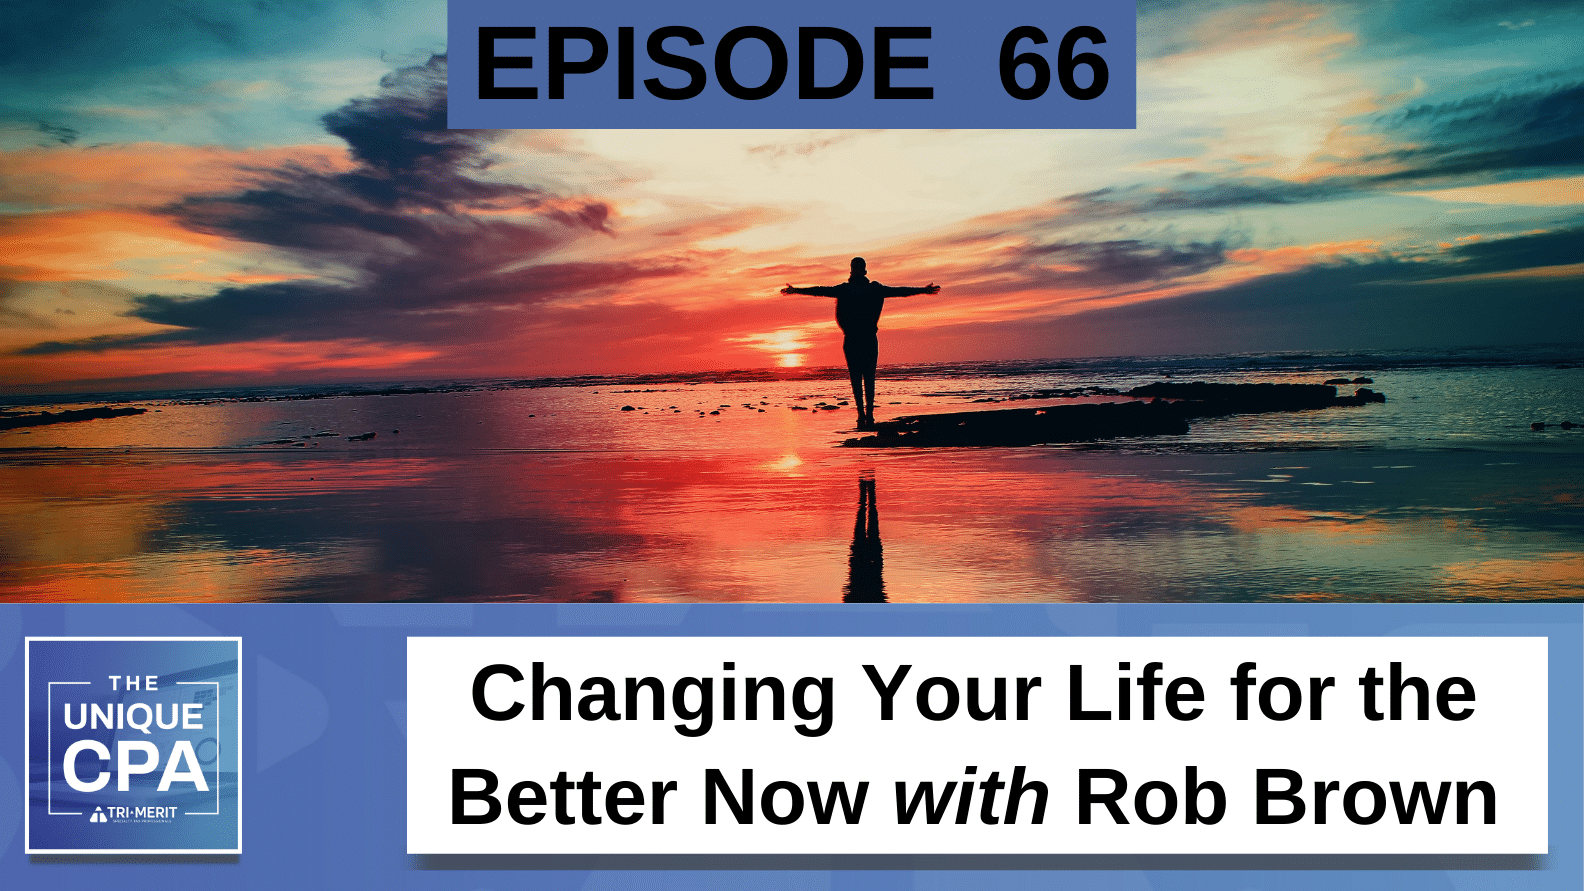 Unique Cpa Featured Image Ep 66 Rob Brown - Changing Your Life For The Better Now - Tri-Merit